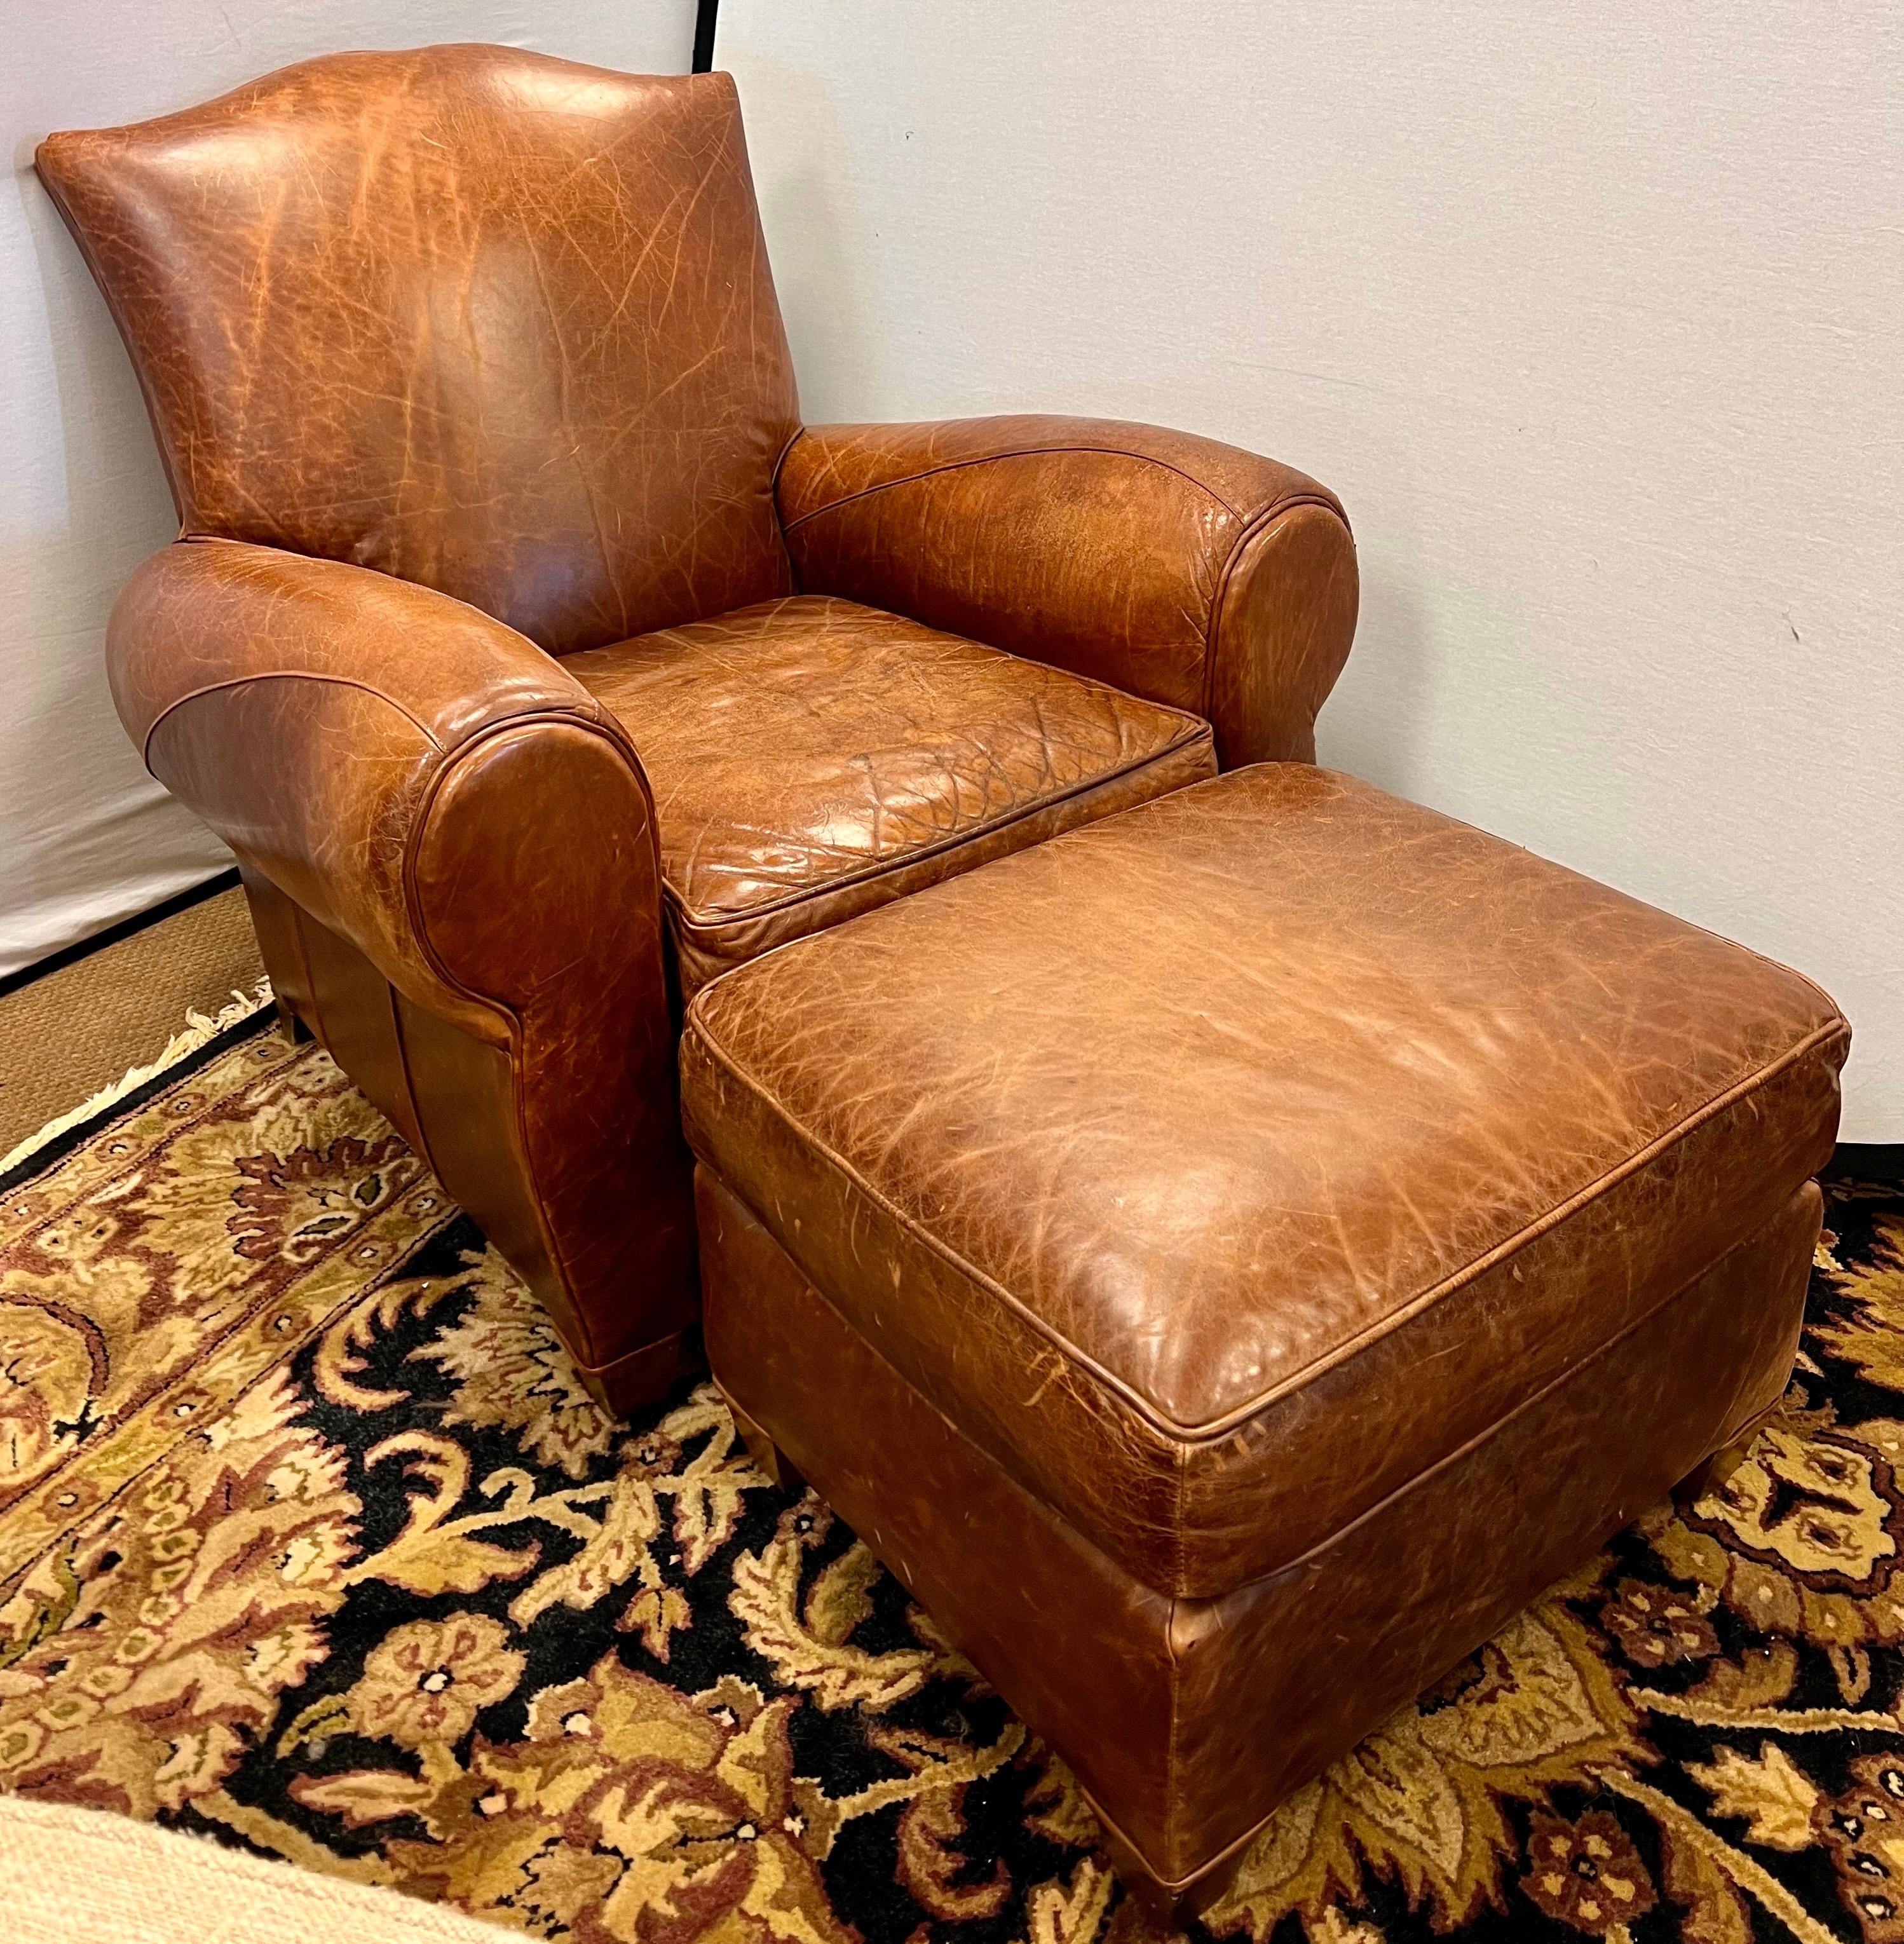 Vintage French mustache back club chair with matching ottoman, that have been aged to perfection with coveted distressed patina only acquired through age and use. The leather is a luxurious caramel brown. The chair is oversized and structurally